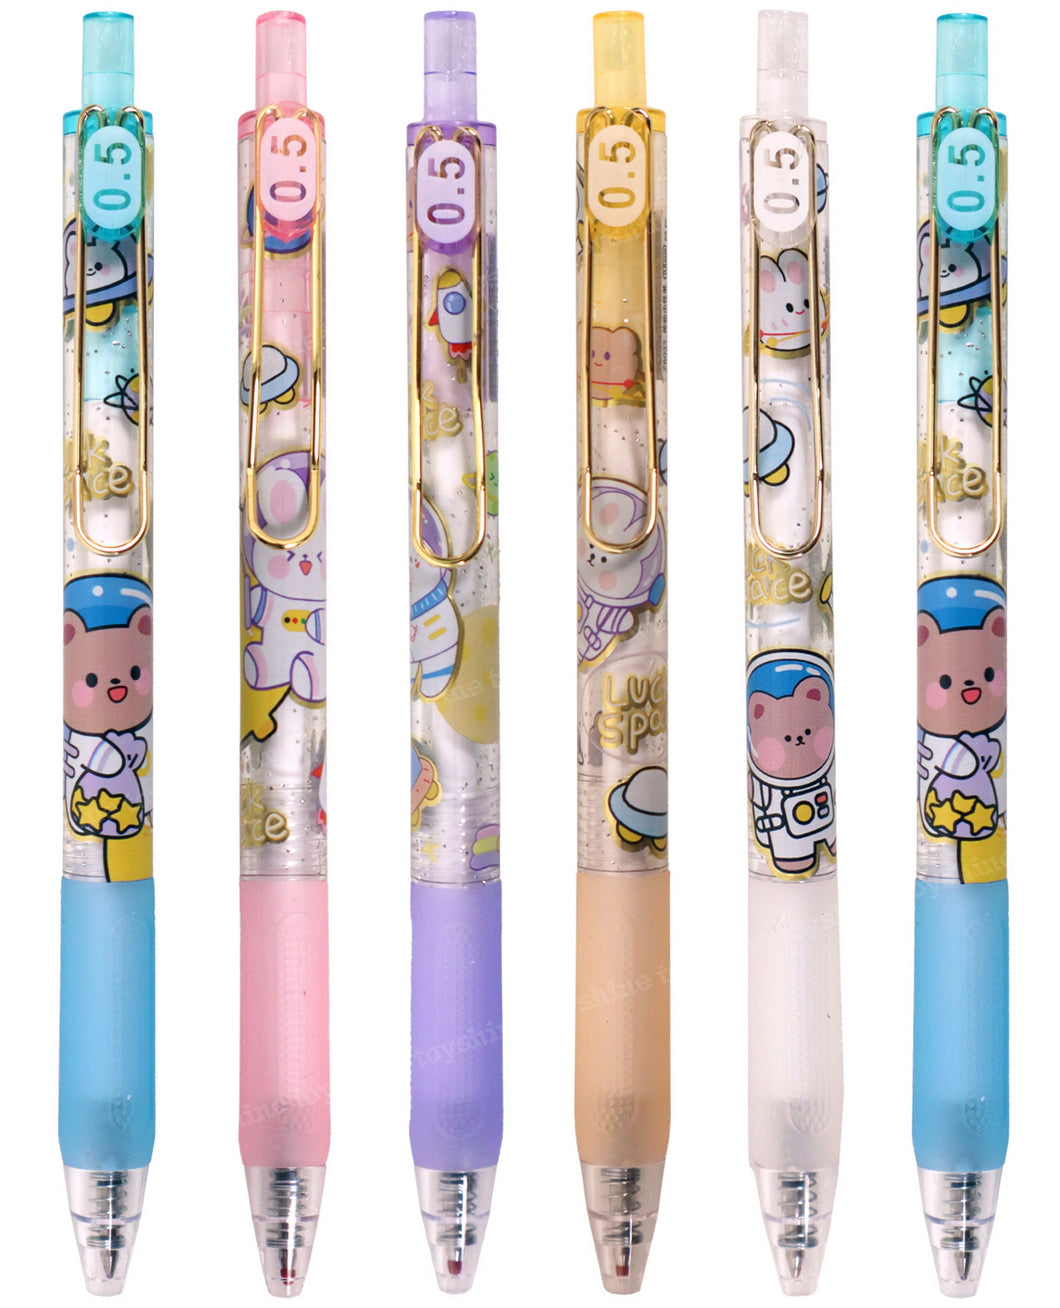 Toyshine Pack of 6 Space Astronaut Gel Pens | Cute Fancy Fine Point Pen for Office Stationary School Supplies Birthday Party Favor Return Gift - Gift Packing